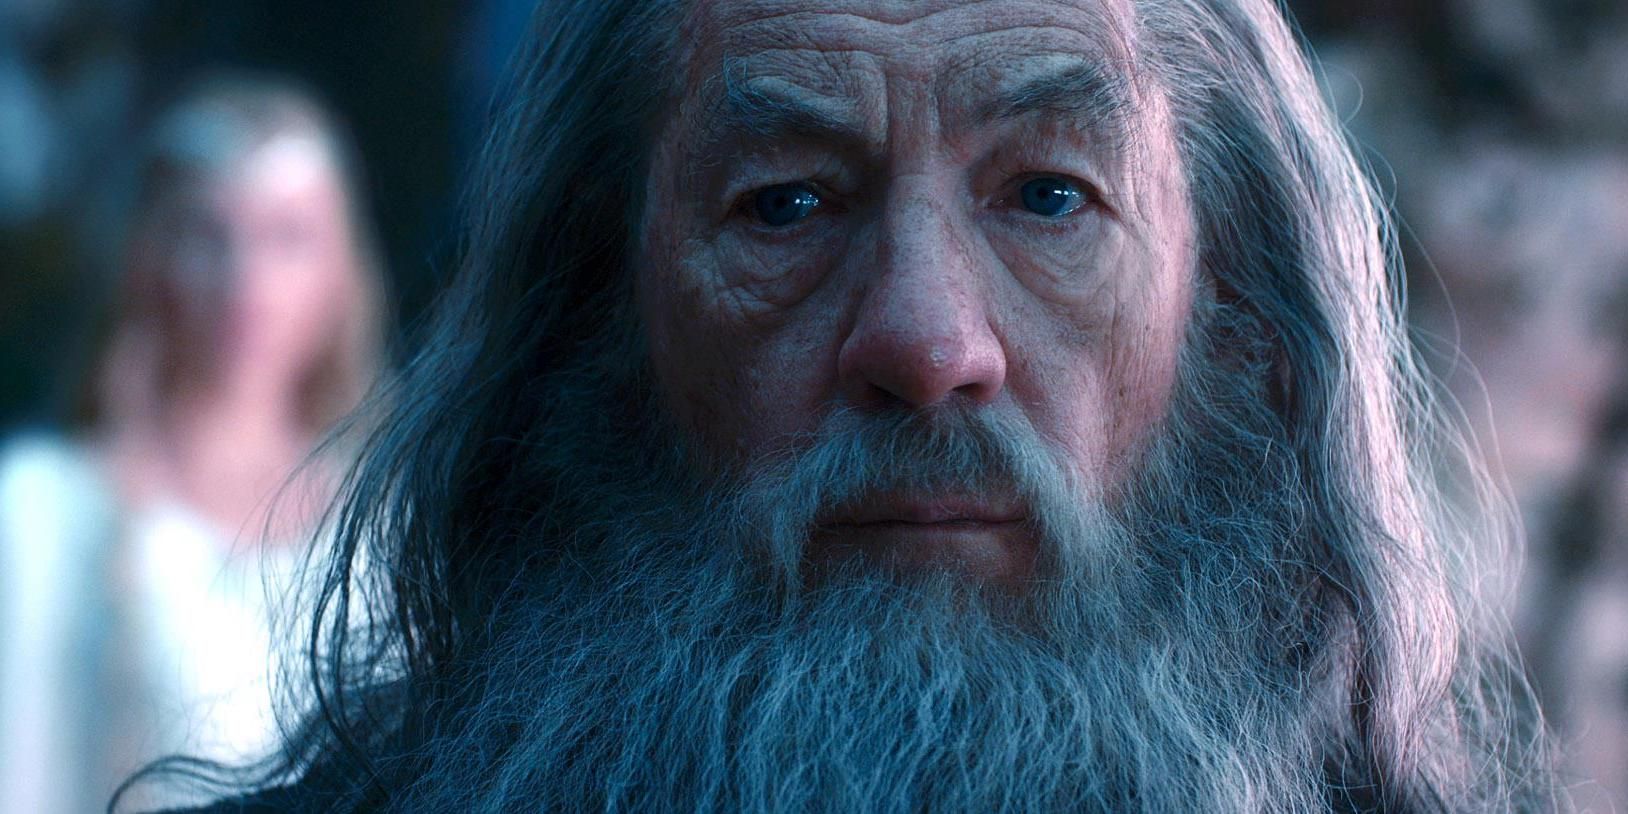 Gandalf in Rivendell with Galadriel behind him in The Hobbit An Unexpected Journey